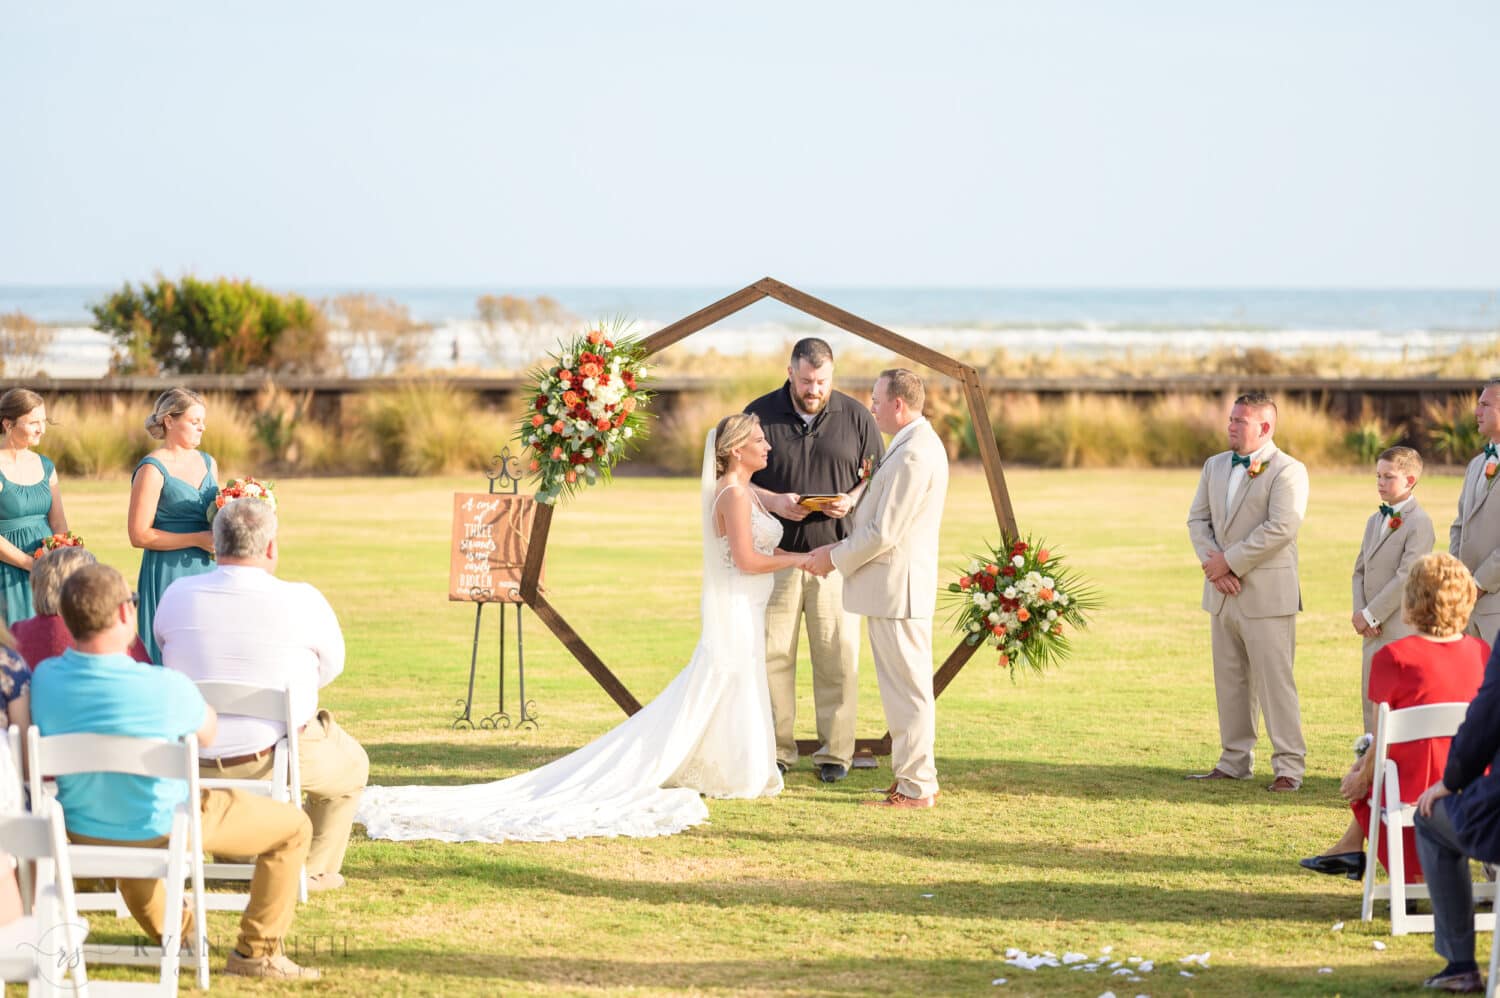 Bride and groom holding hands during the ceremony - Dunes Golf & Beach Club